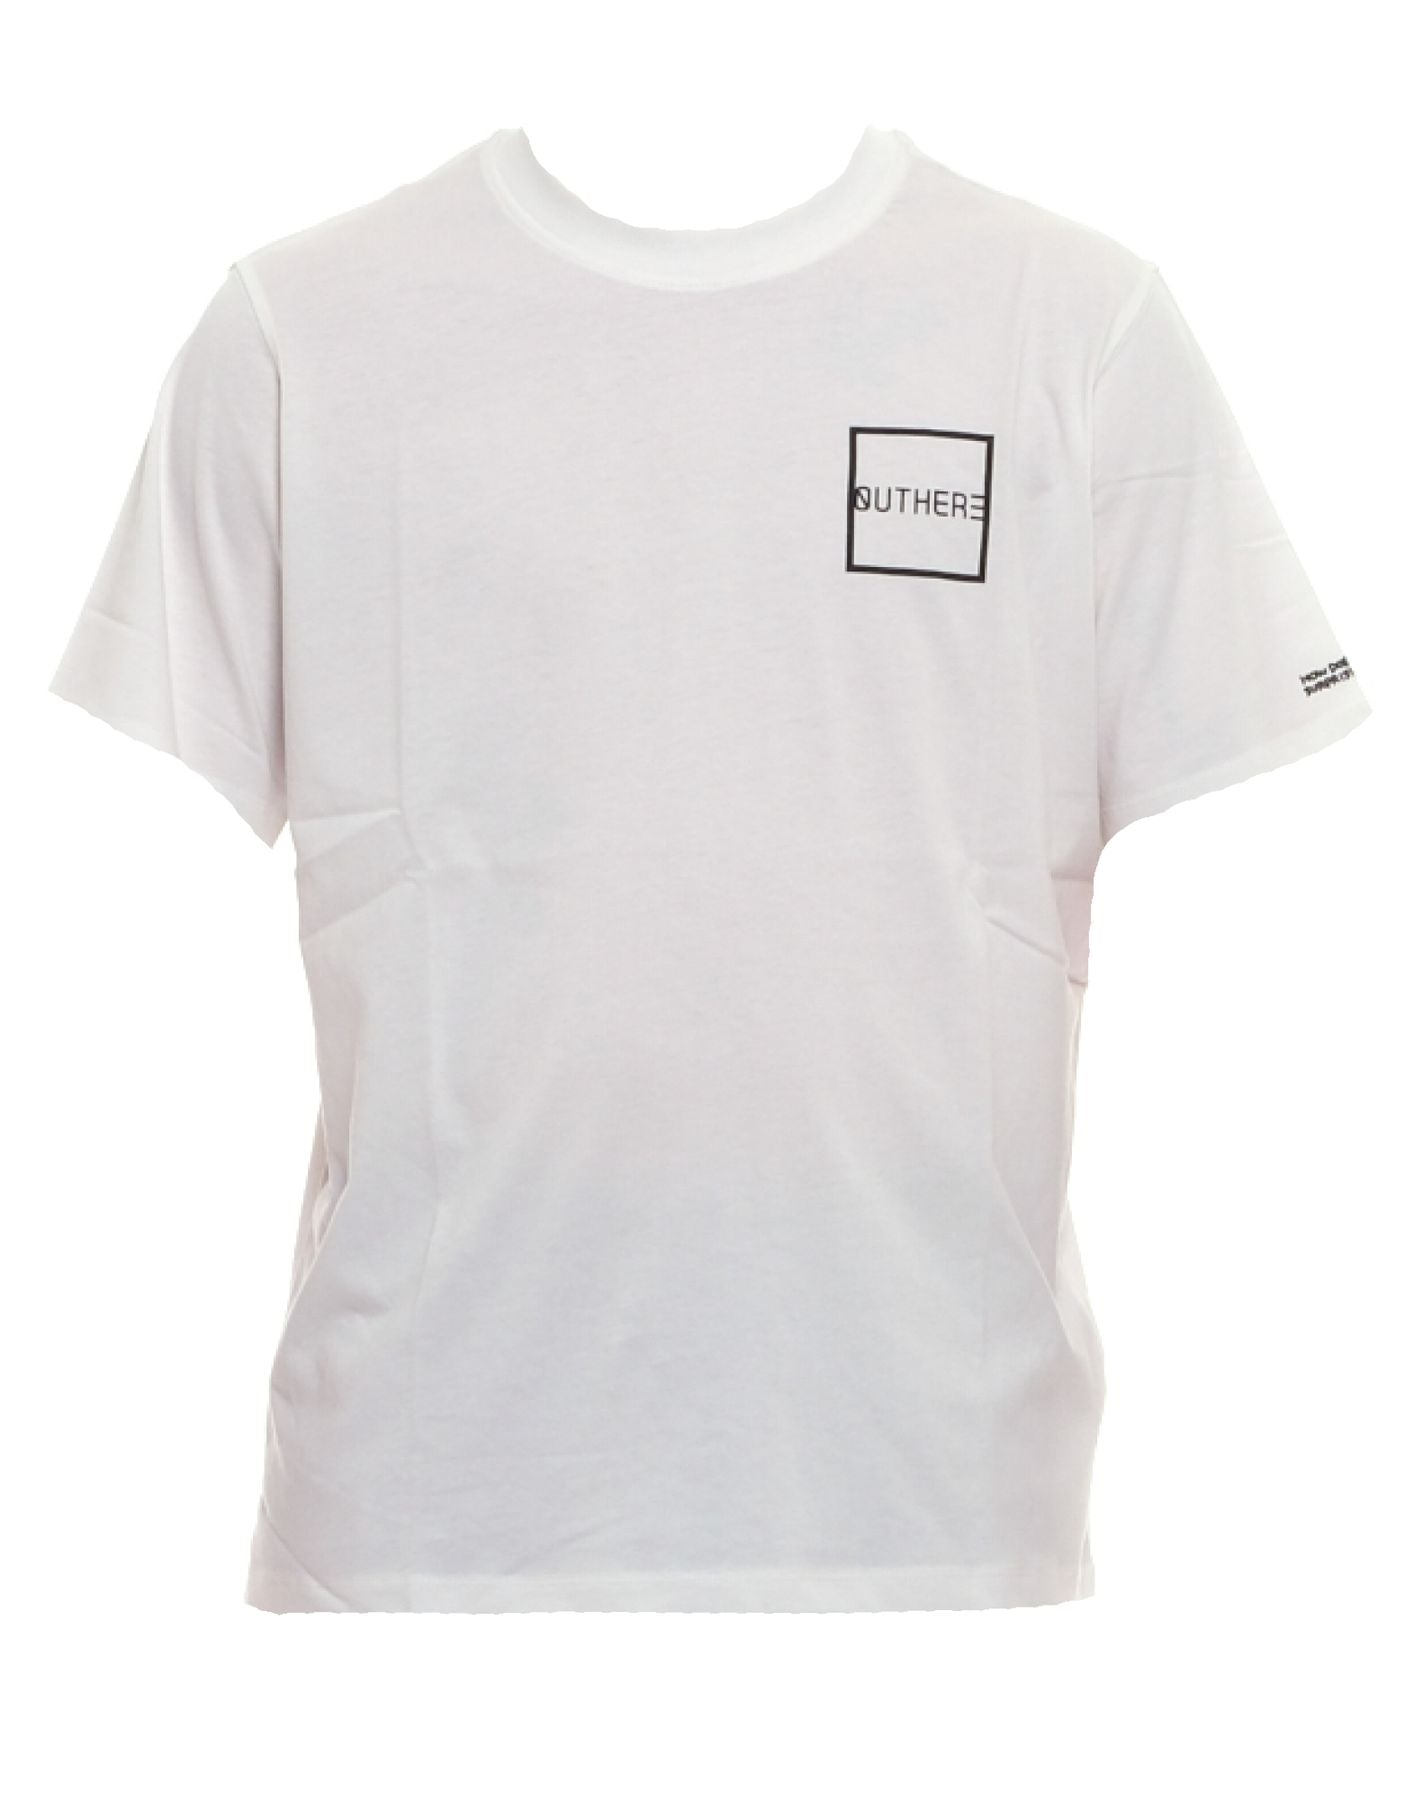 T-shirt for man EOTM136AG95 WHITE OUTHERE